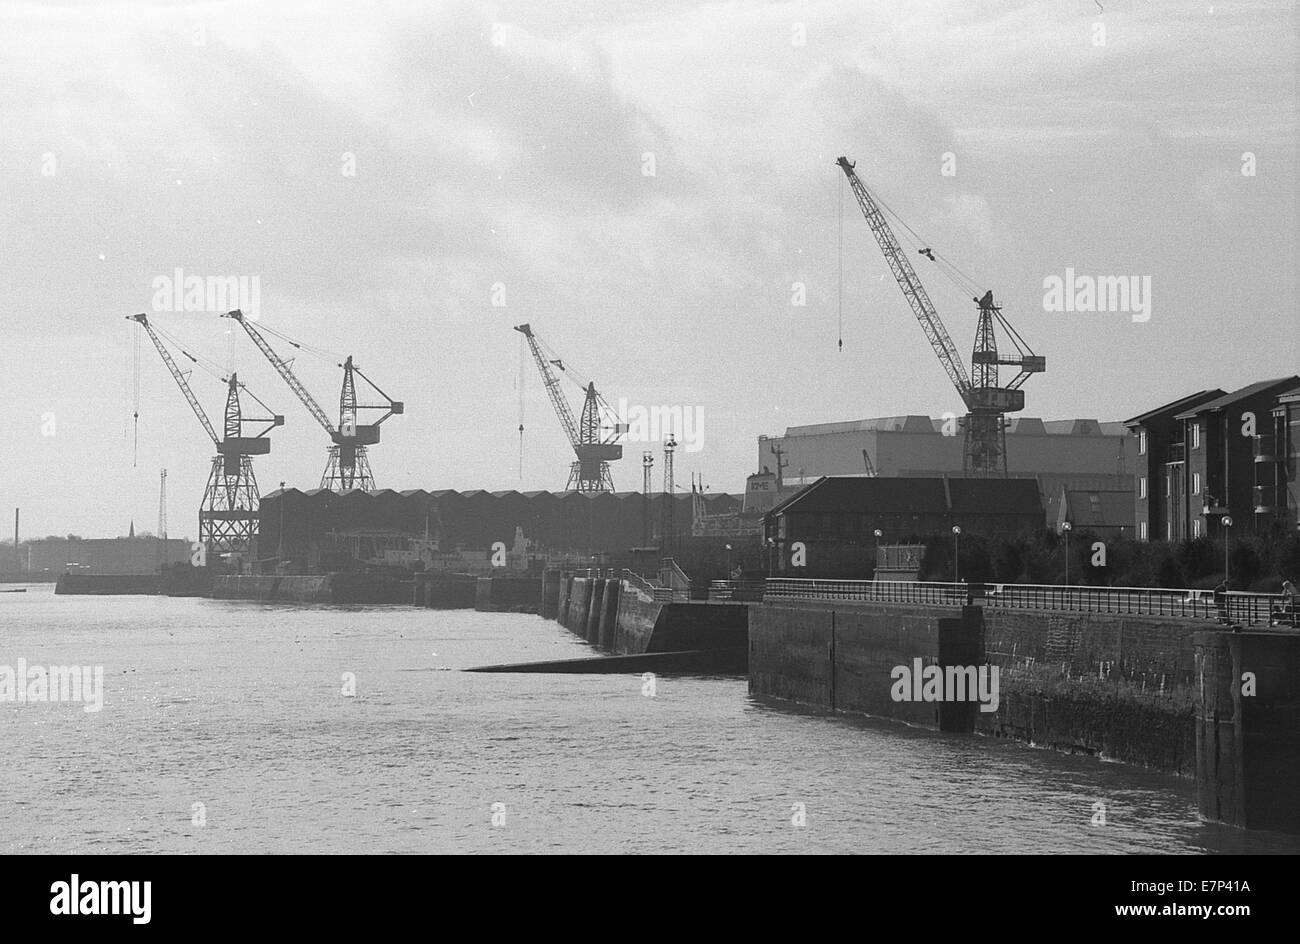 cammel lairds ship yard on the river mersey Stock Photo